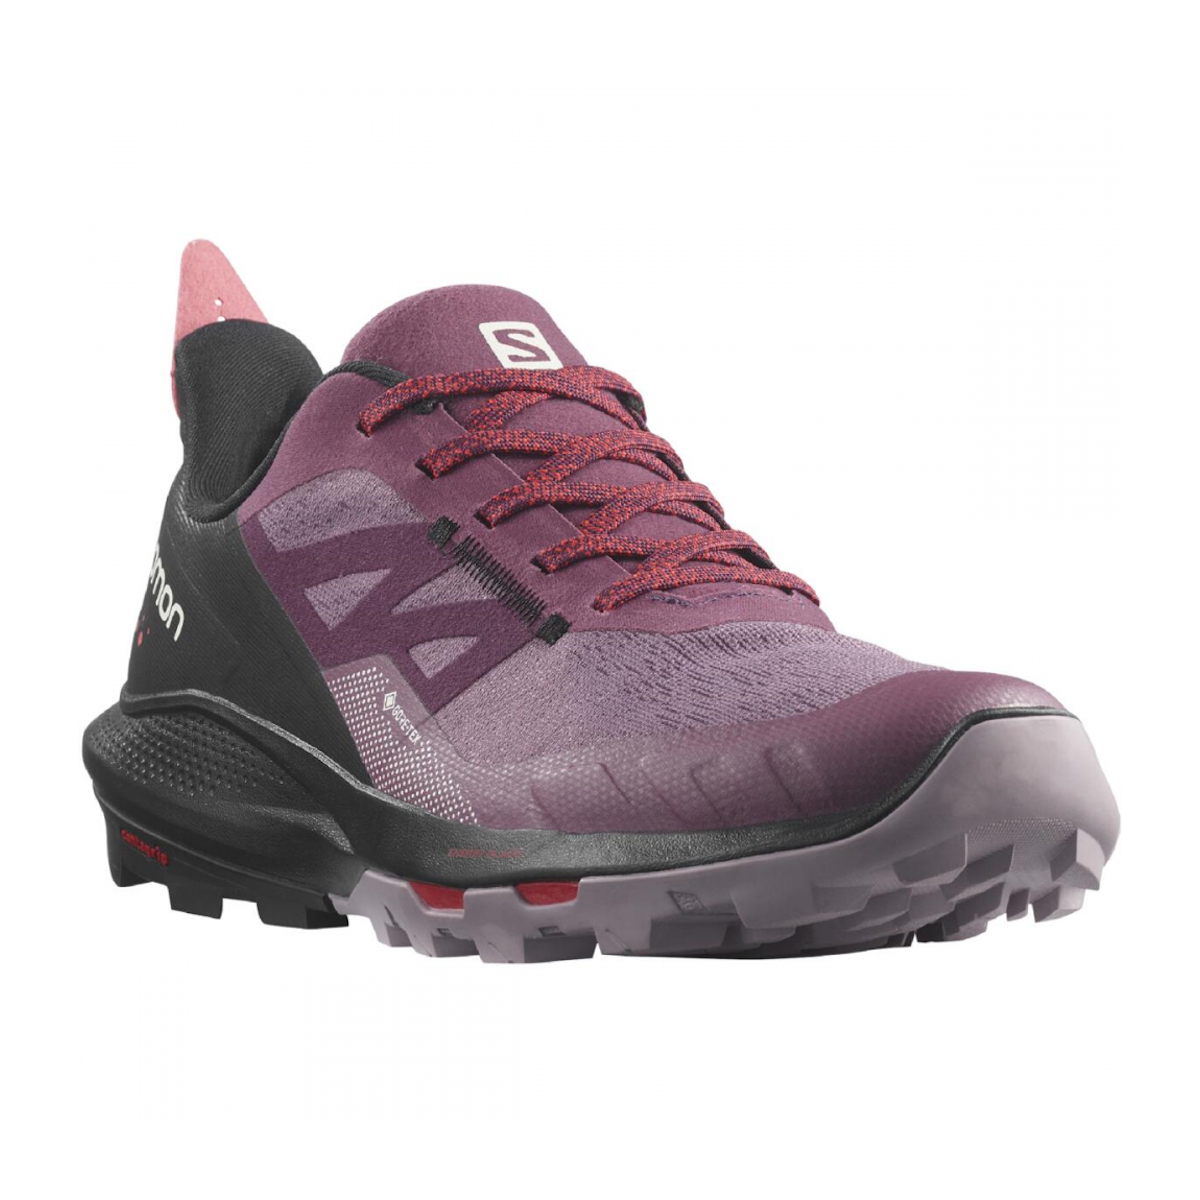 SALOMON OUTPULSE GTX W trail running shoes - violet/black/red